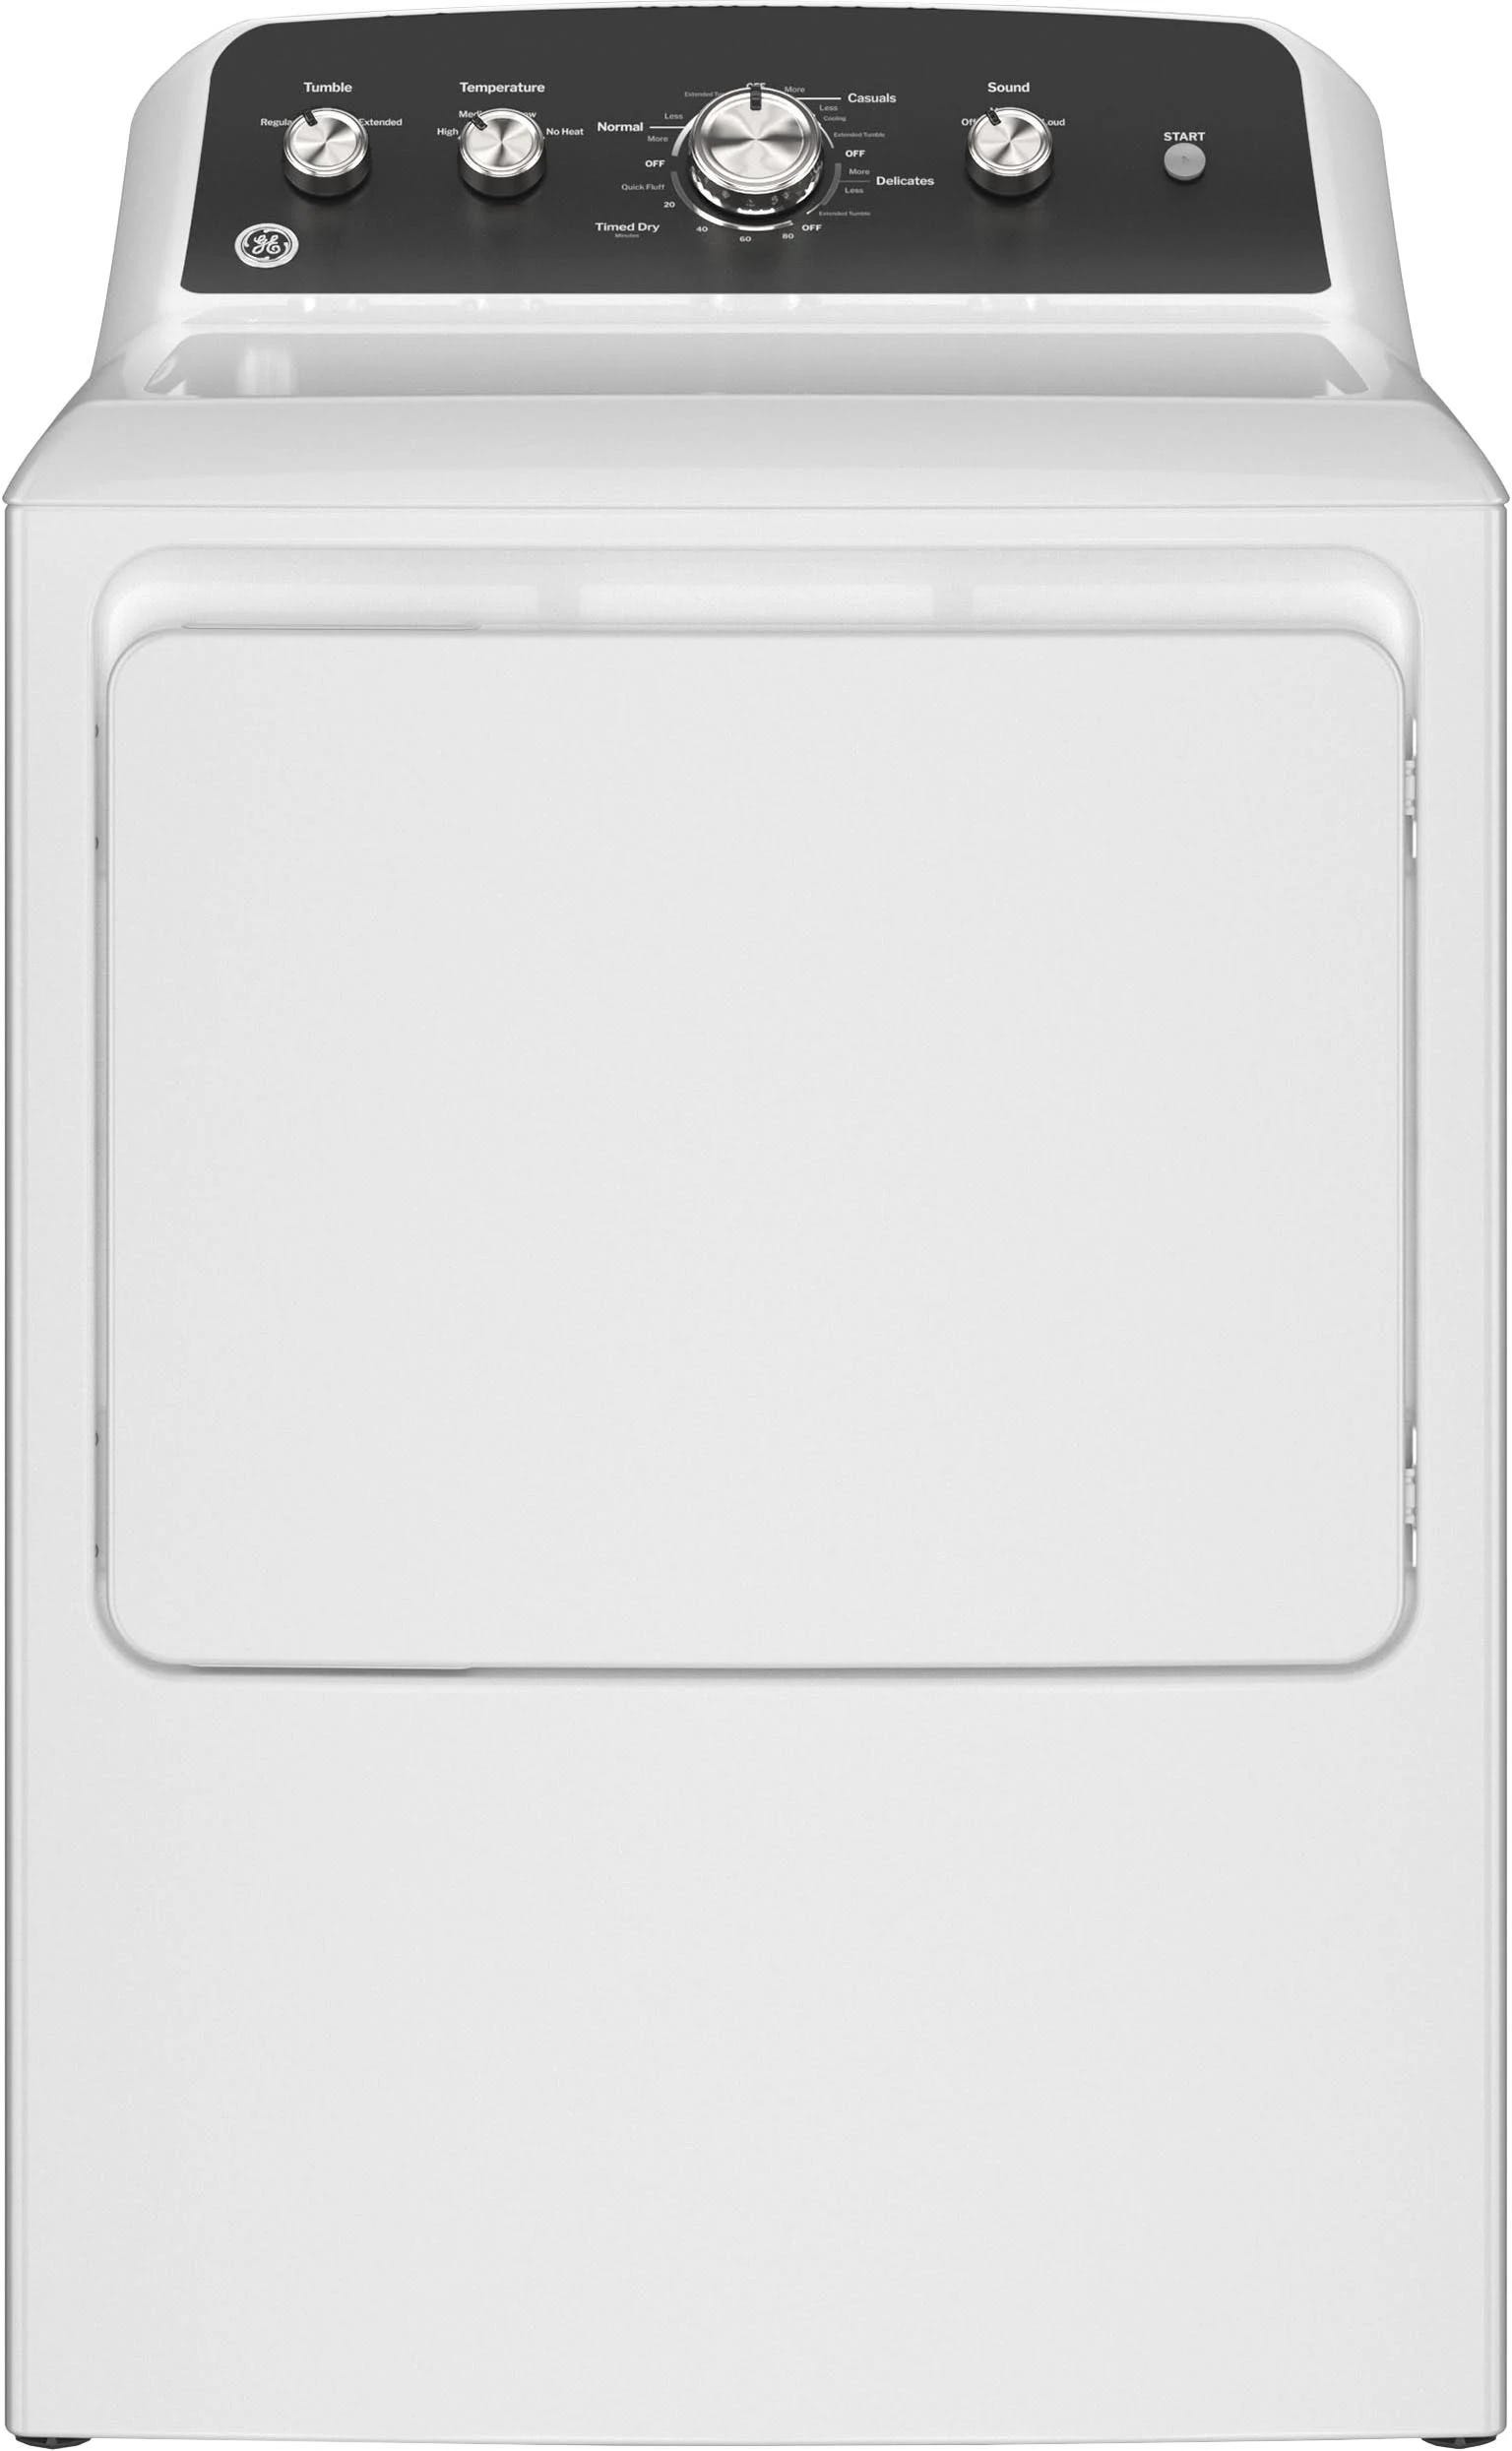 GE Capacity Electric Dryer with Up to 120 ft. GTD48EASWWB | Image